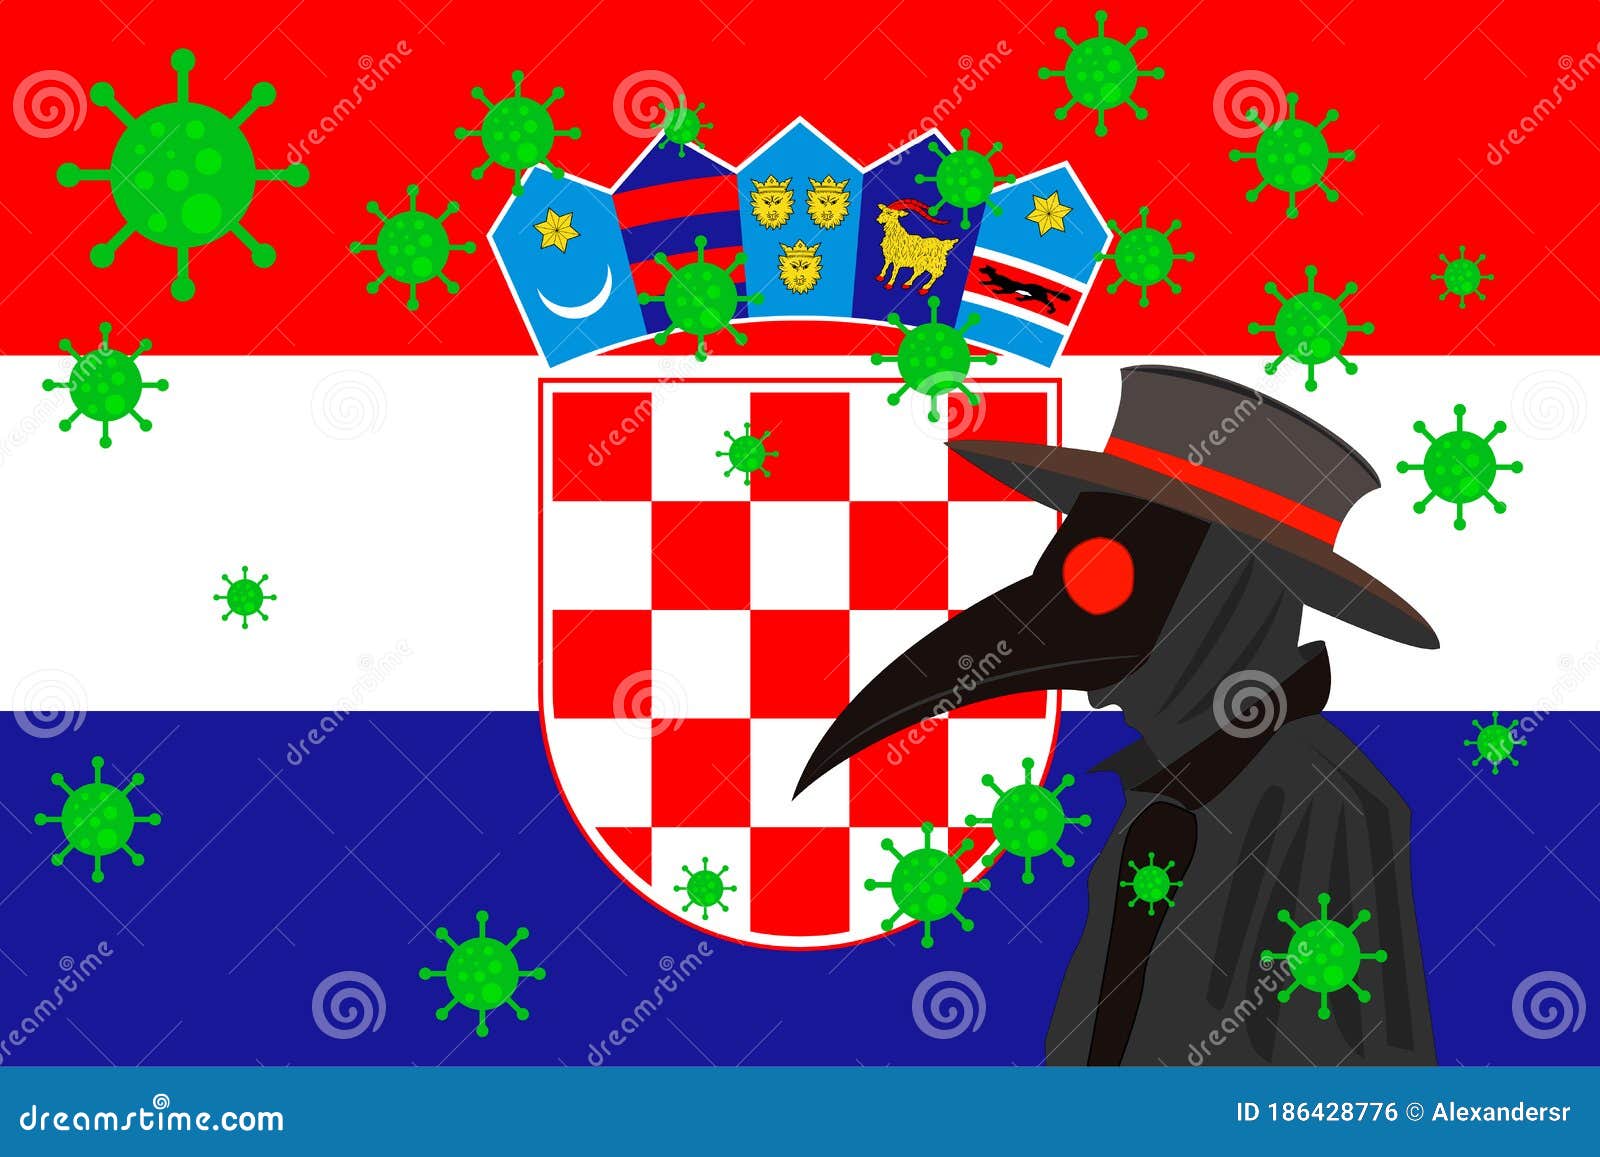 black plague doctor surrounded by viruses with copy space with croacia flag